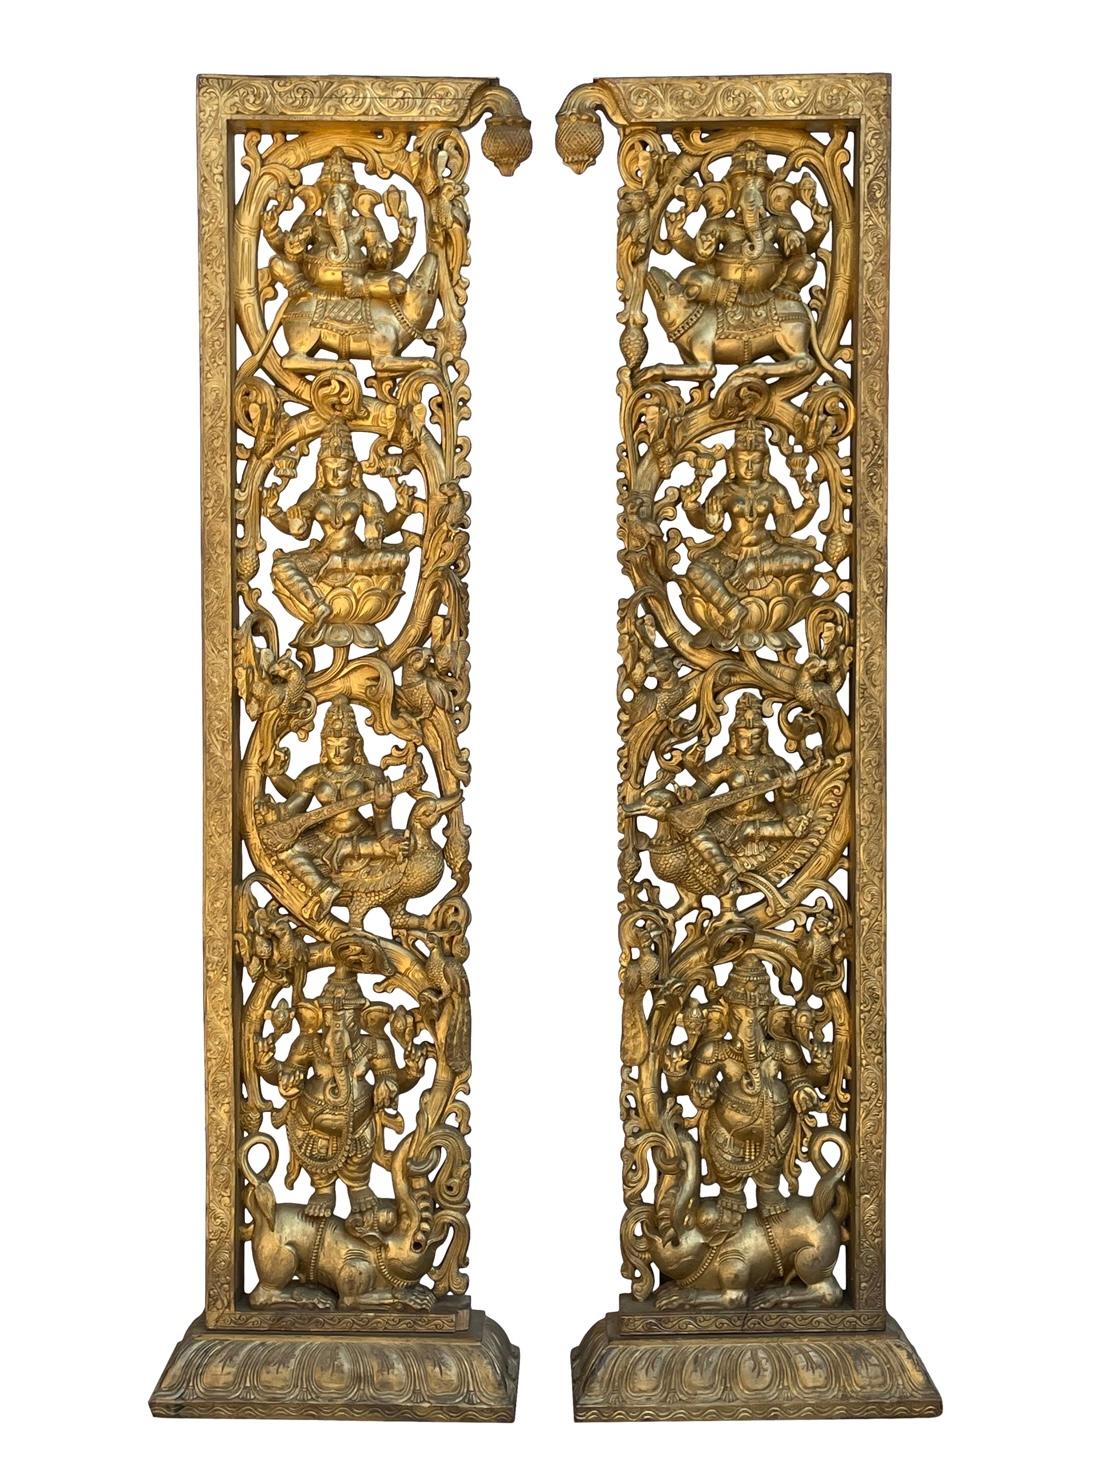 Late 20th Century Vintage Gilded Ganesha Carved Room Divider Doorway-A Pair For Sale